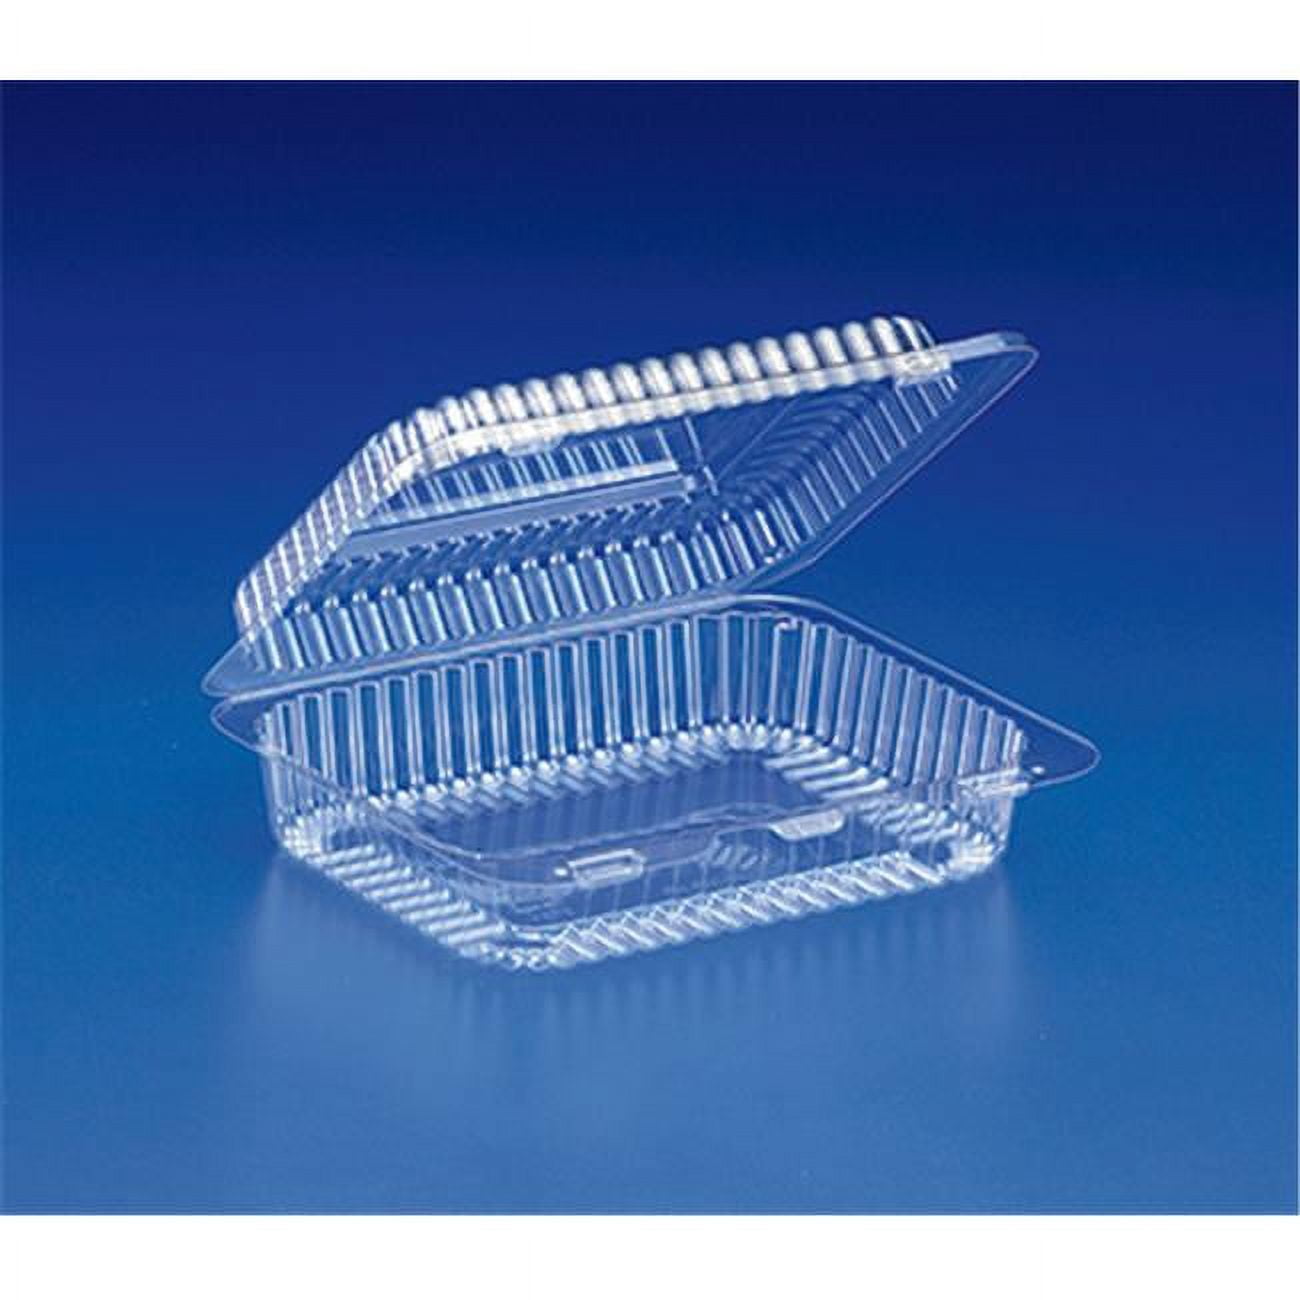 Slp26 Hinged Lid Container Tray Pet, Clear - Case Of 300